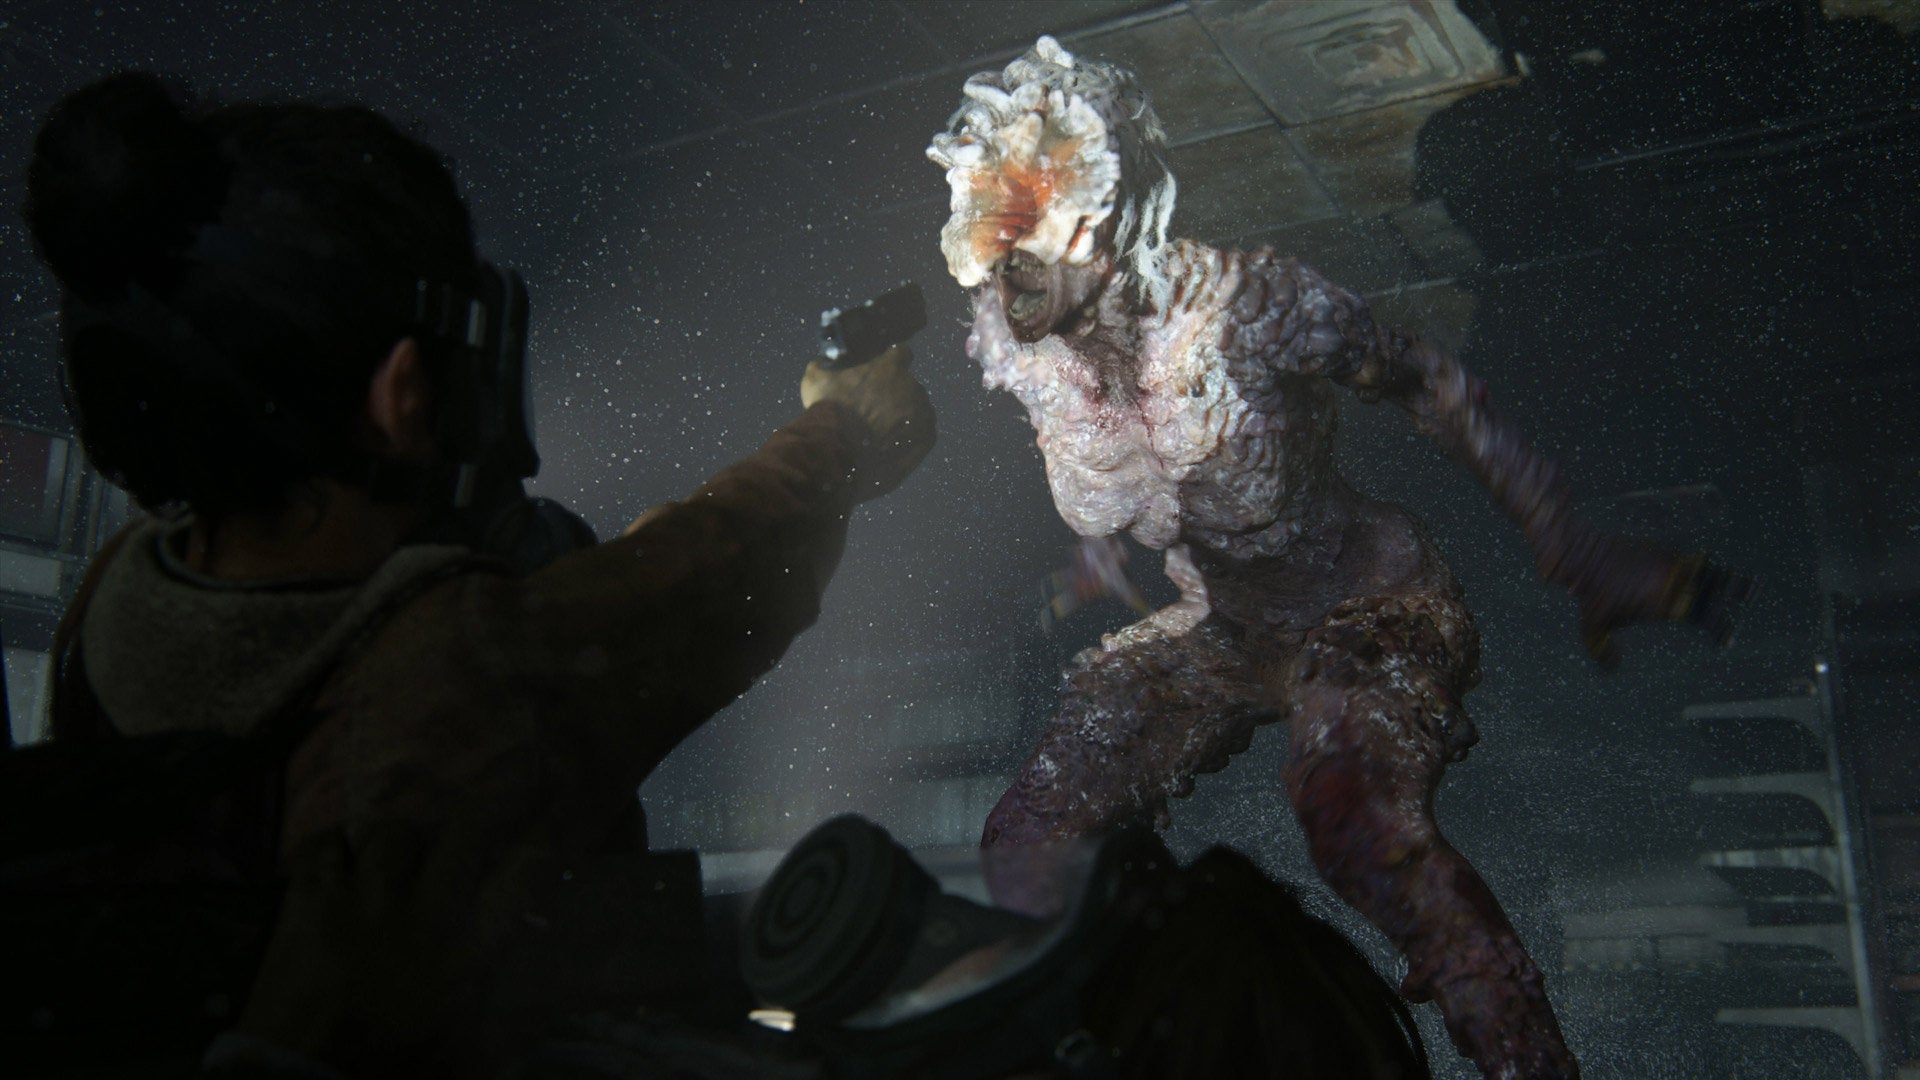 How They Created Clicker Sounds in The Last of Us! #behindthescenes #d, clicker zombie